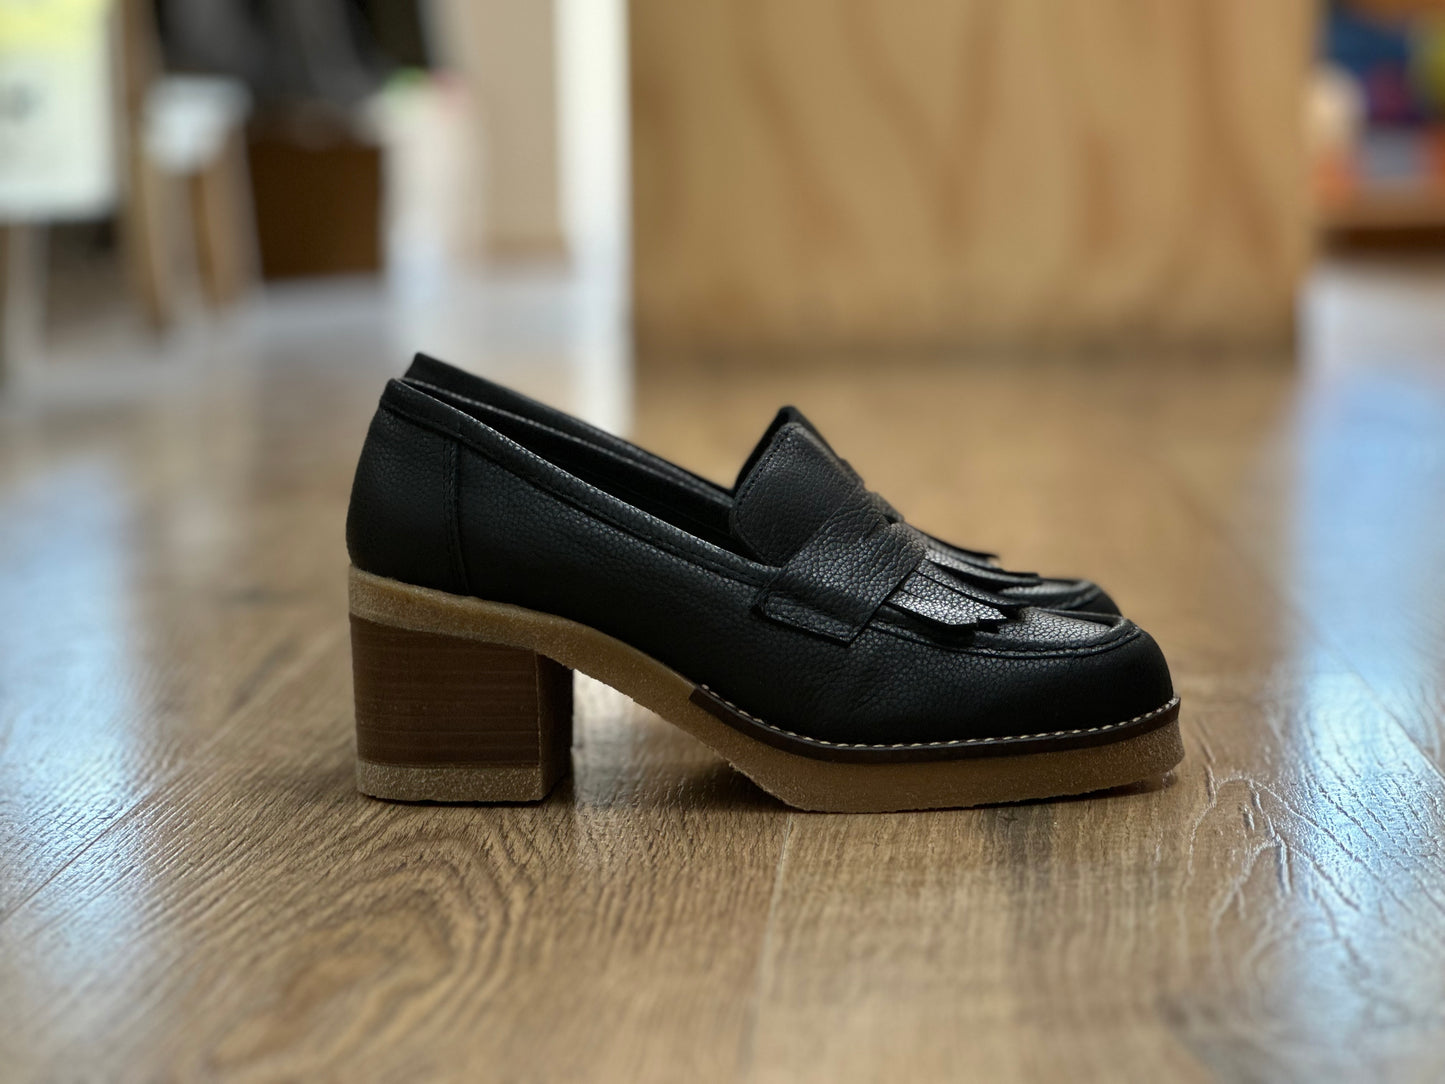 Neo Shoes Metis Loafer in Black